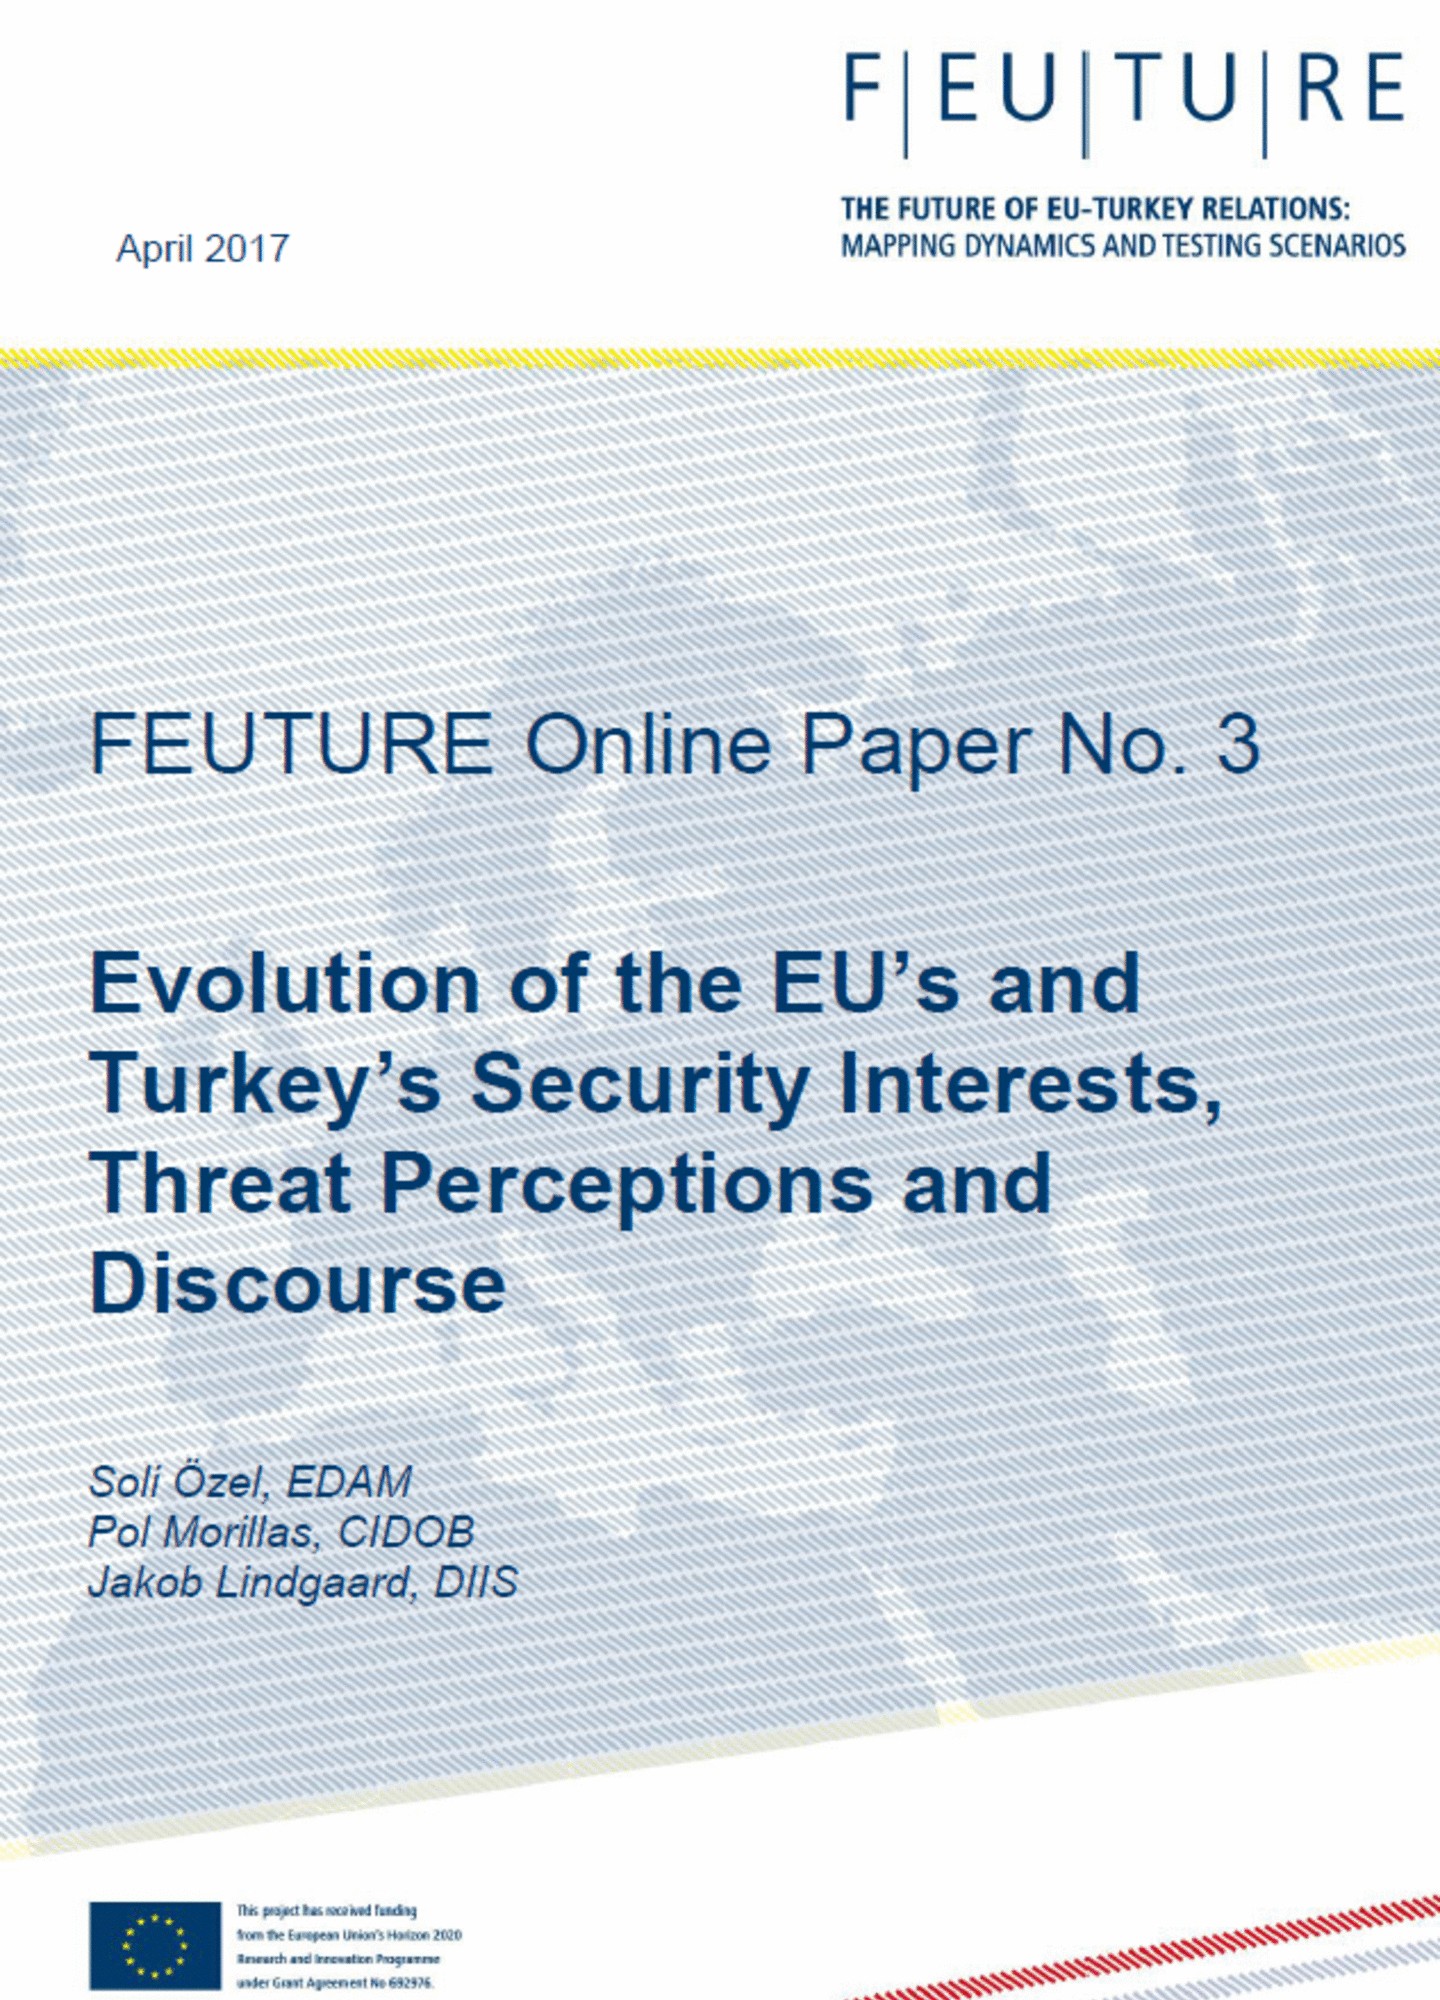 Evolution of the EU's and Turkey's Security Interests, Threat Perceptions and Discourse